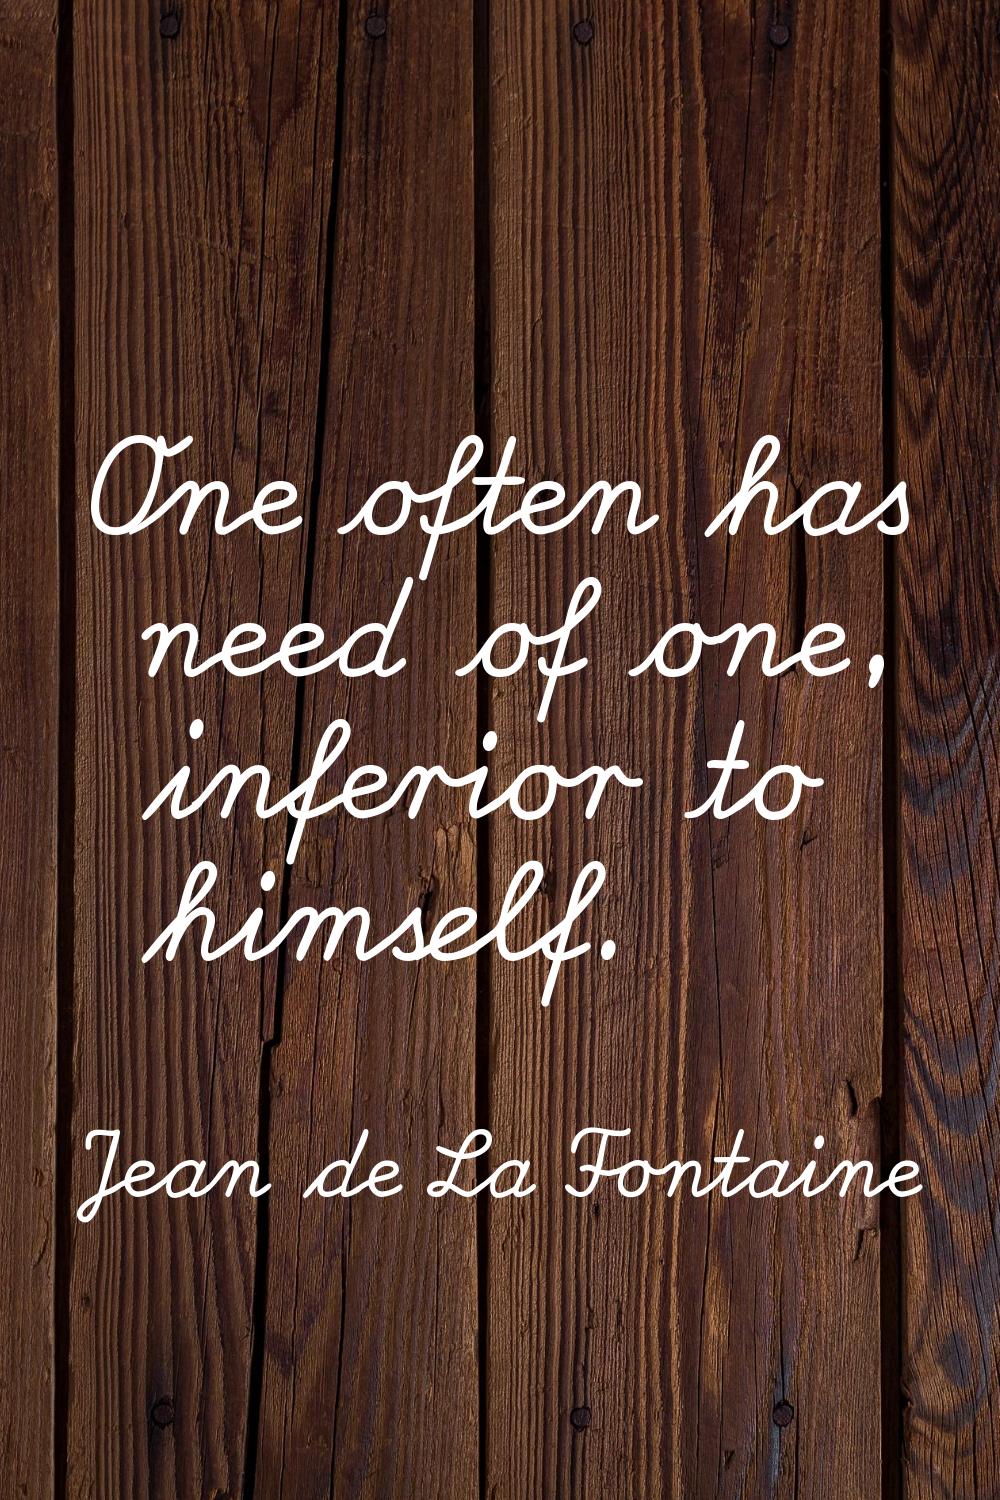 One often has need of one, inferior to himself.